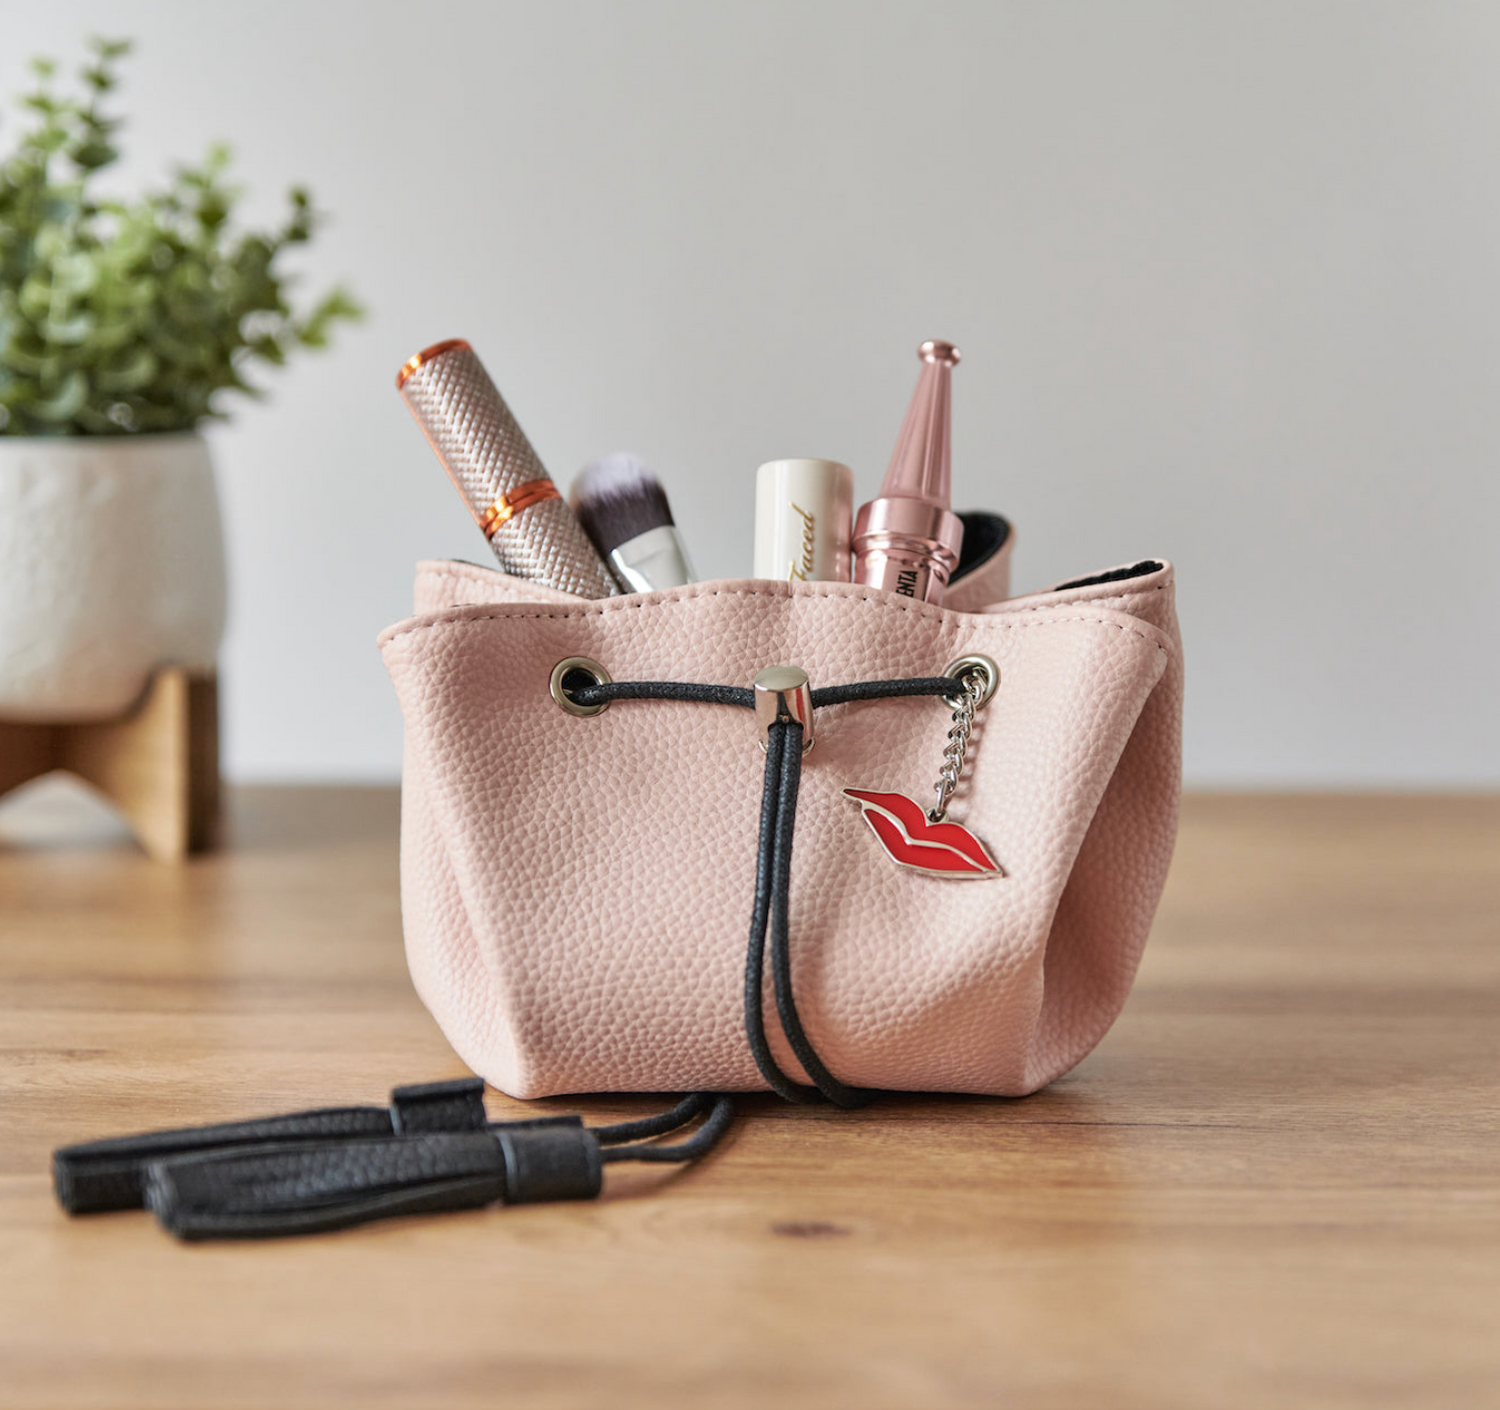 Mini Faux Leather Makeup Bag in Pale Blush Pink